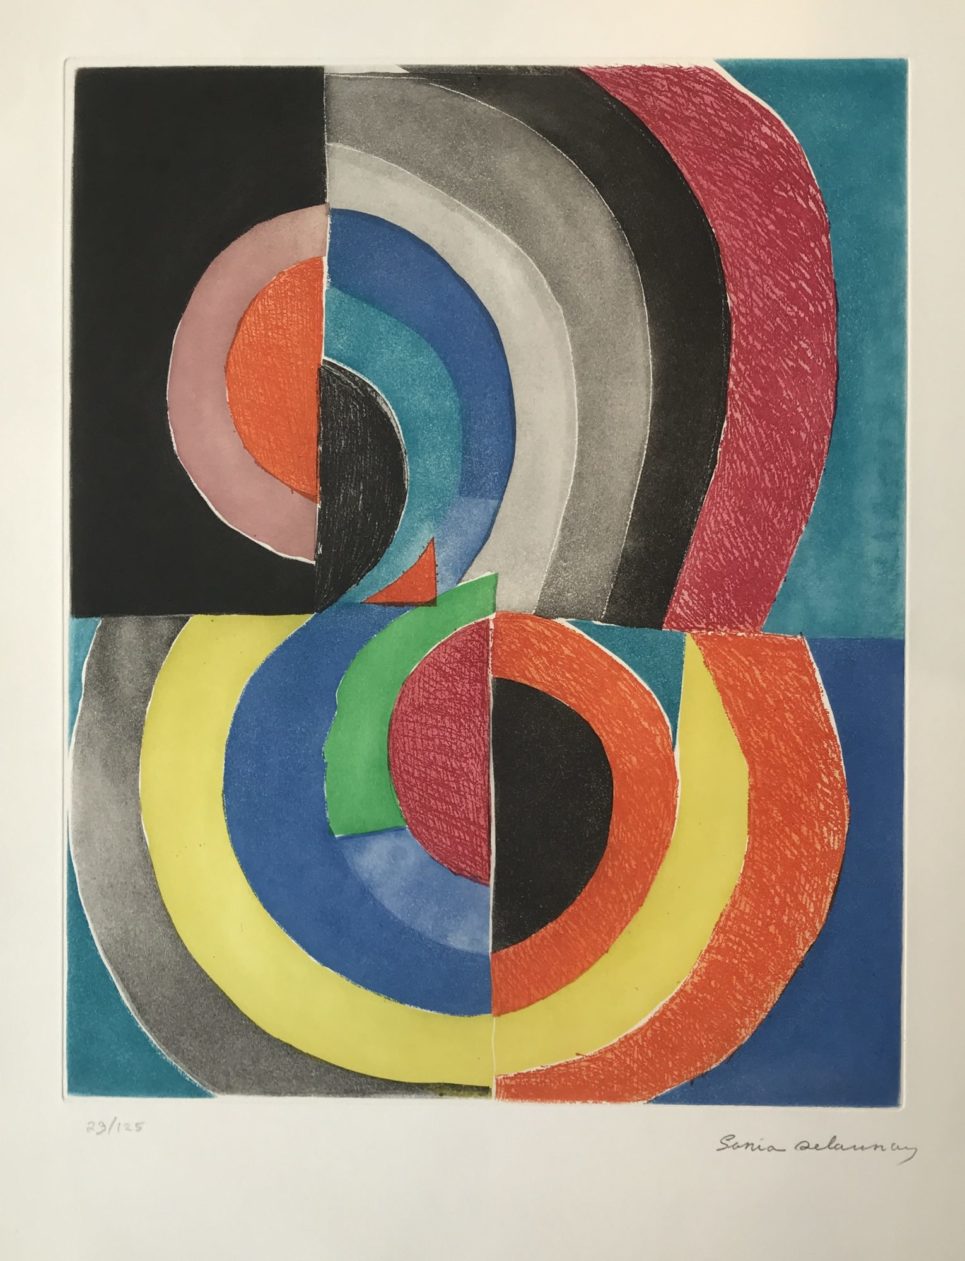 Sonia Delaunay - Composition with Semicircles